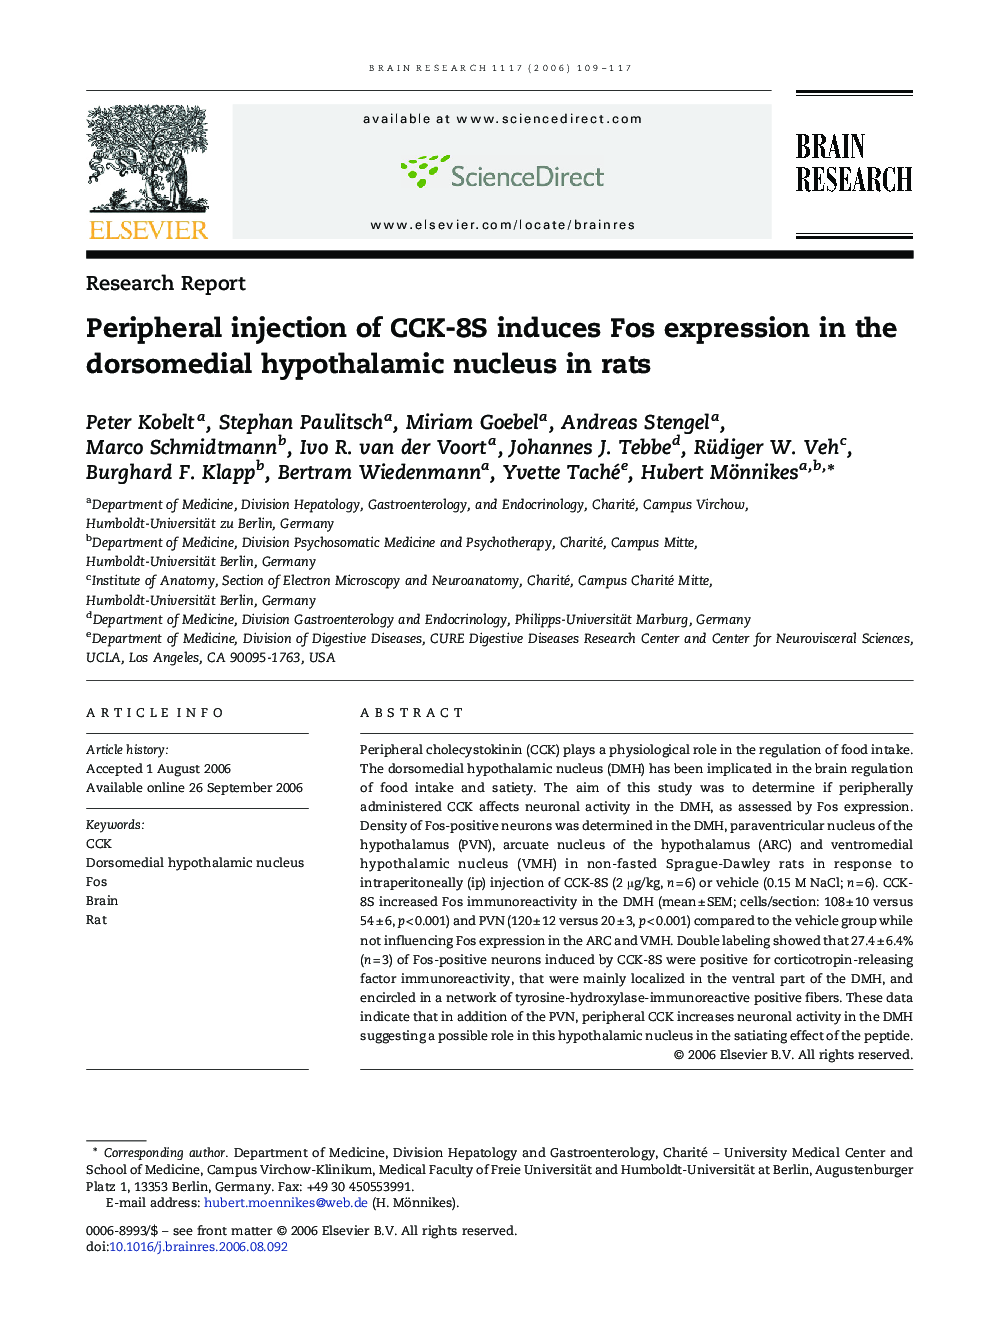 Peripheral injection of CCK-8S induces Fos expression in the dorsomedial hypothalamic nucleus in rats